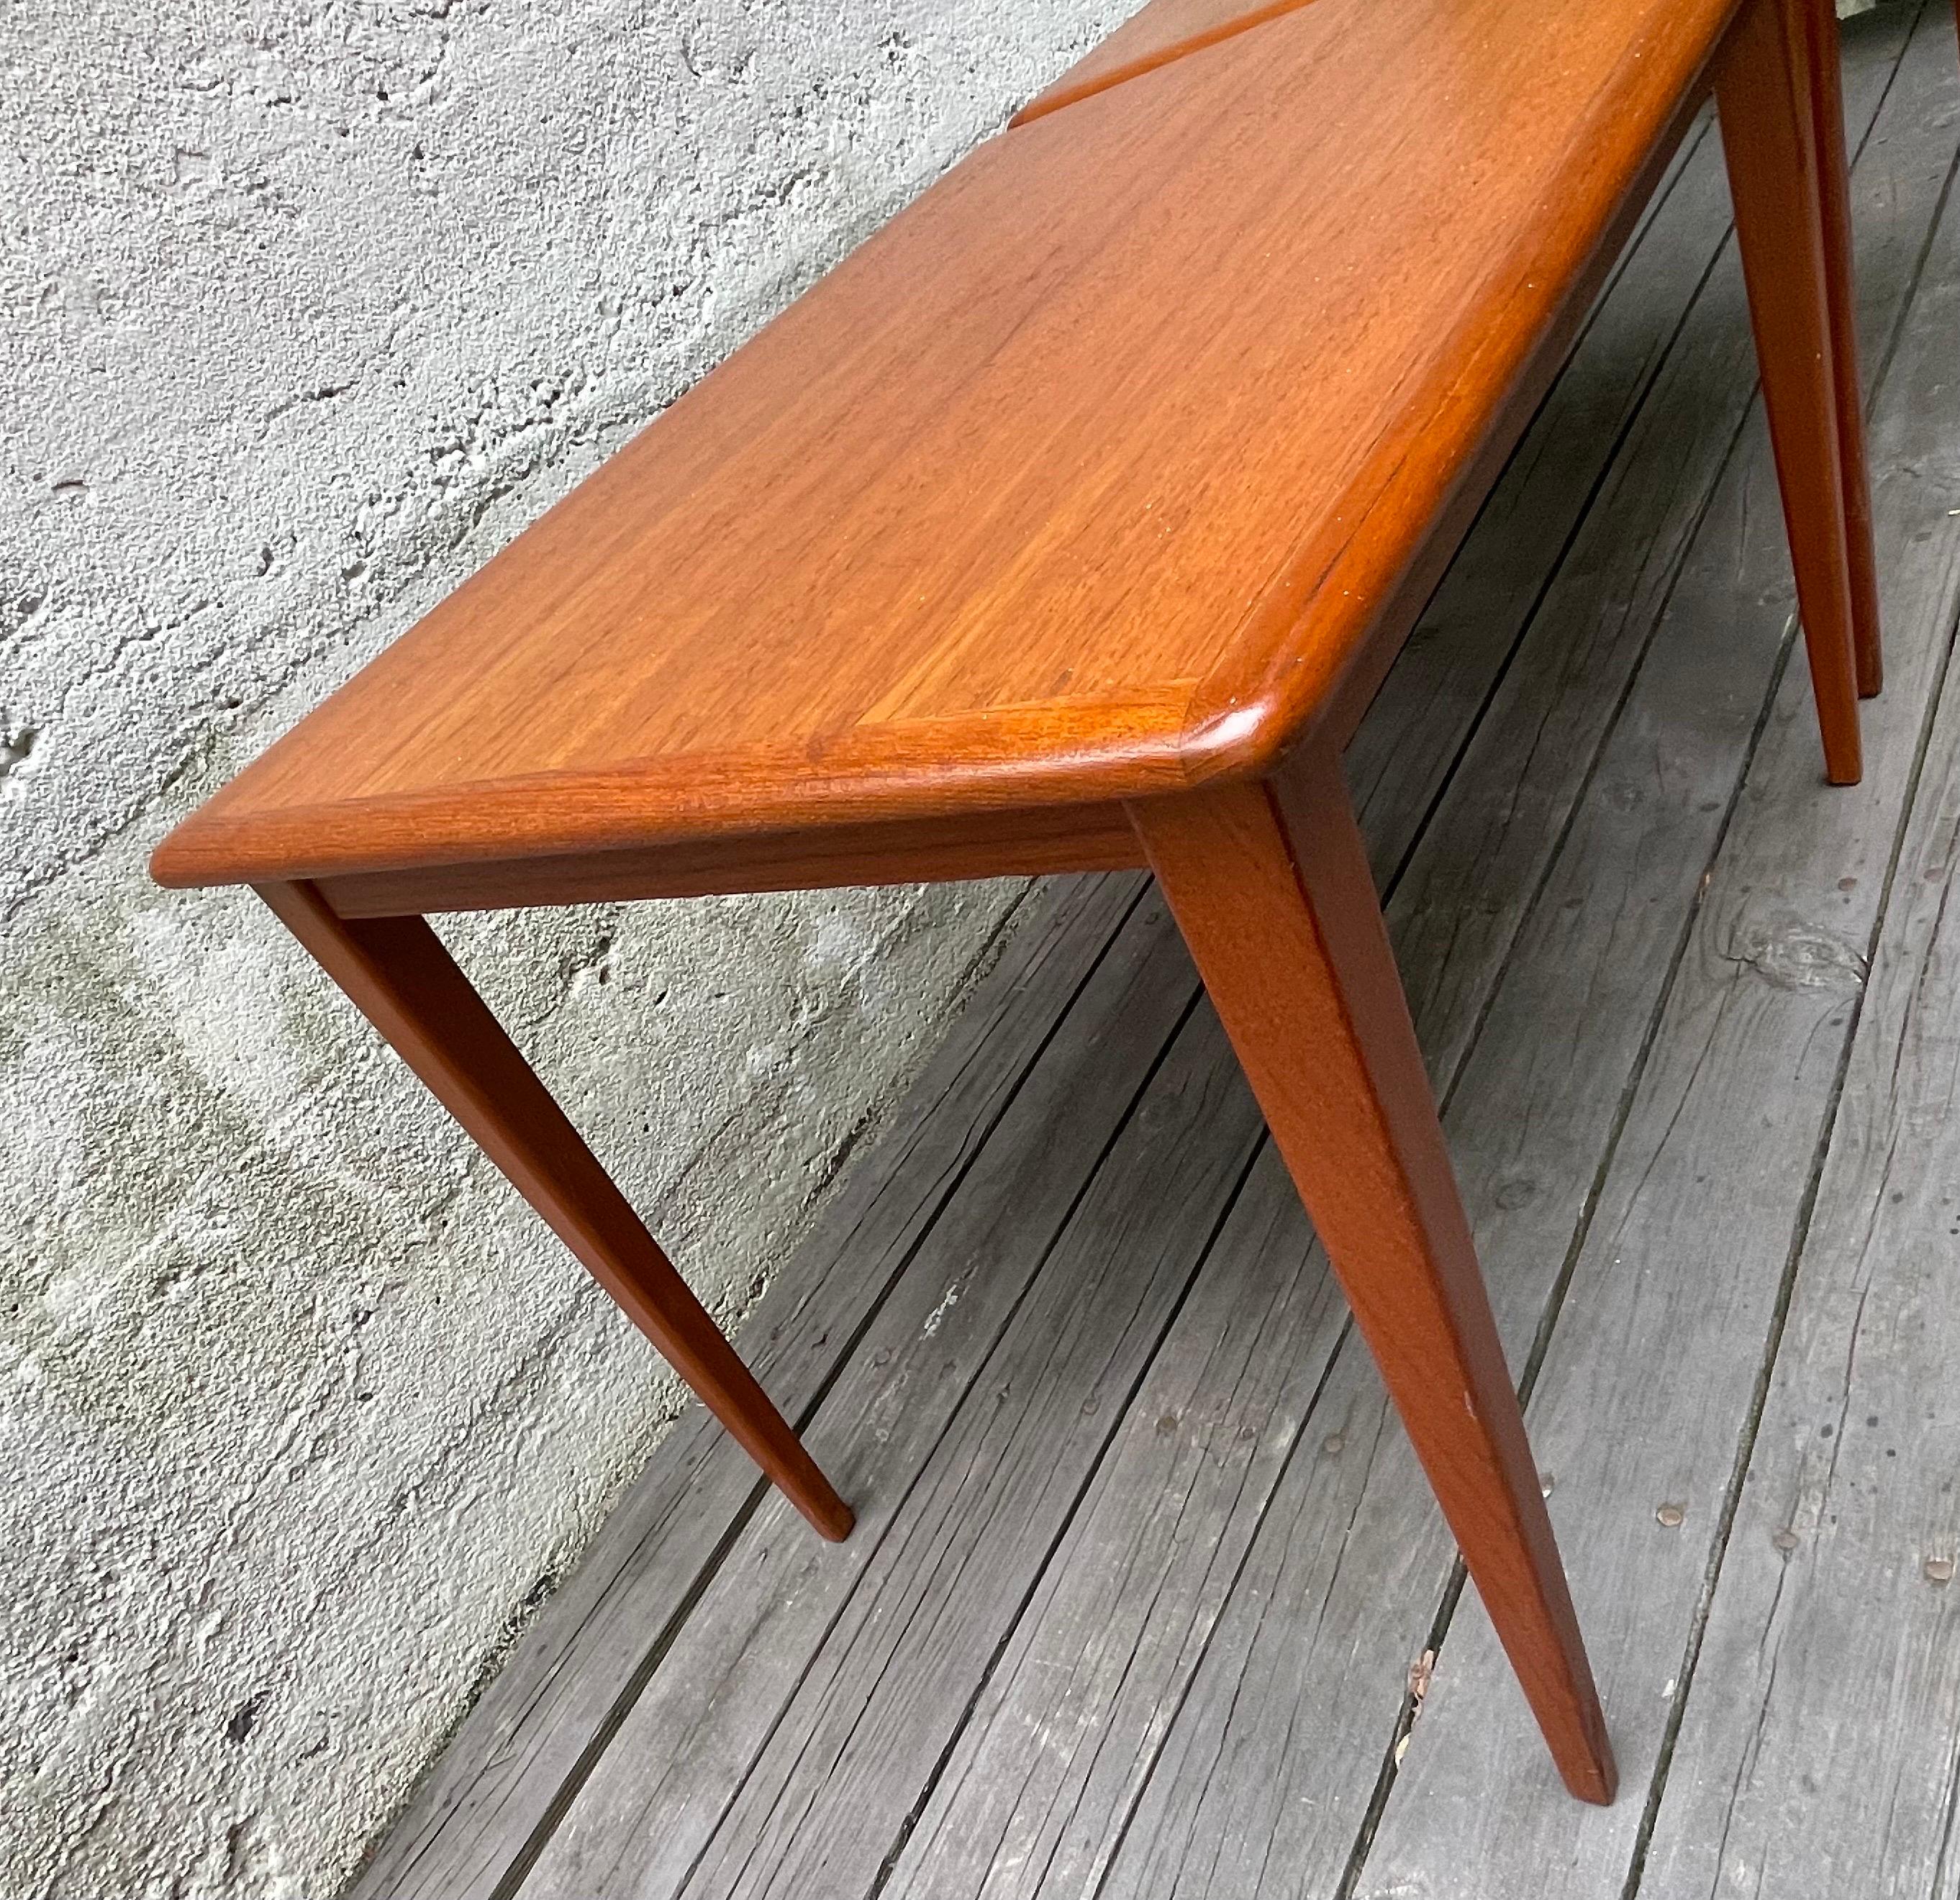 Pair of Mid-Century Modern Teak Side Tables or End Tables, Denmark, 1960's For Sale 2